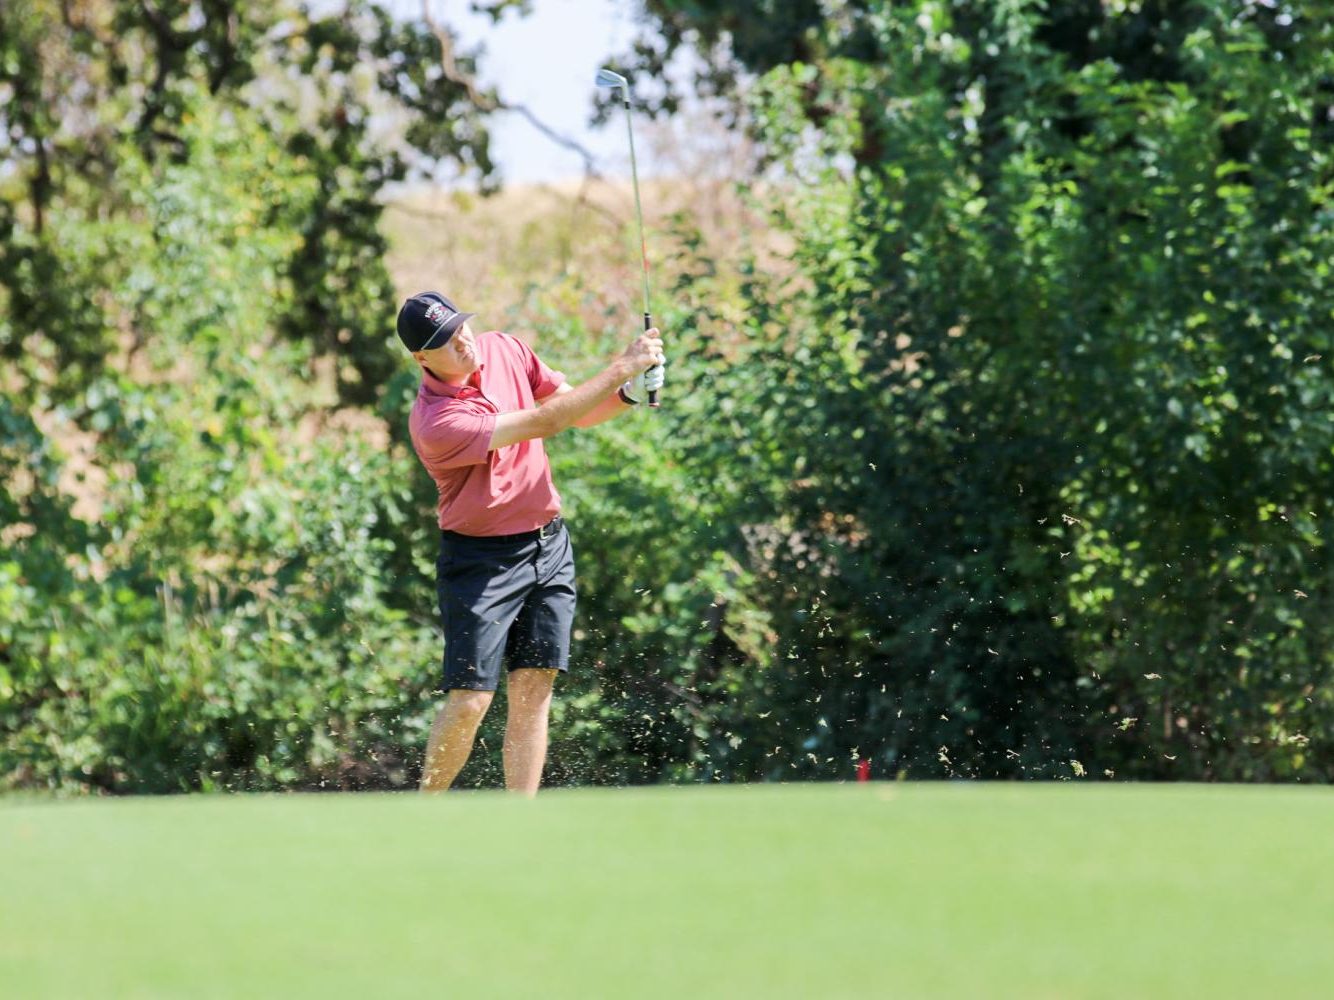 At practice, sophomore Dakota Ochoa hits his golf ball down the middle of the fairway with one of his iron clubs. Photo captured by Alejandro Mejia Mejia